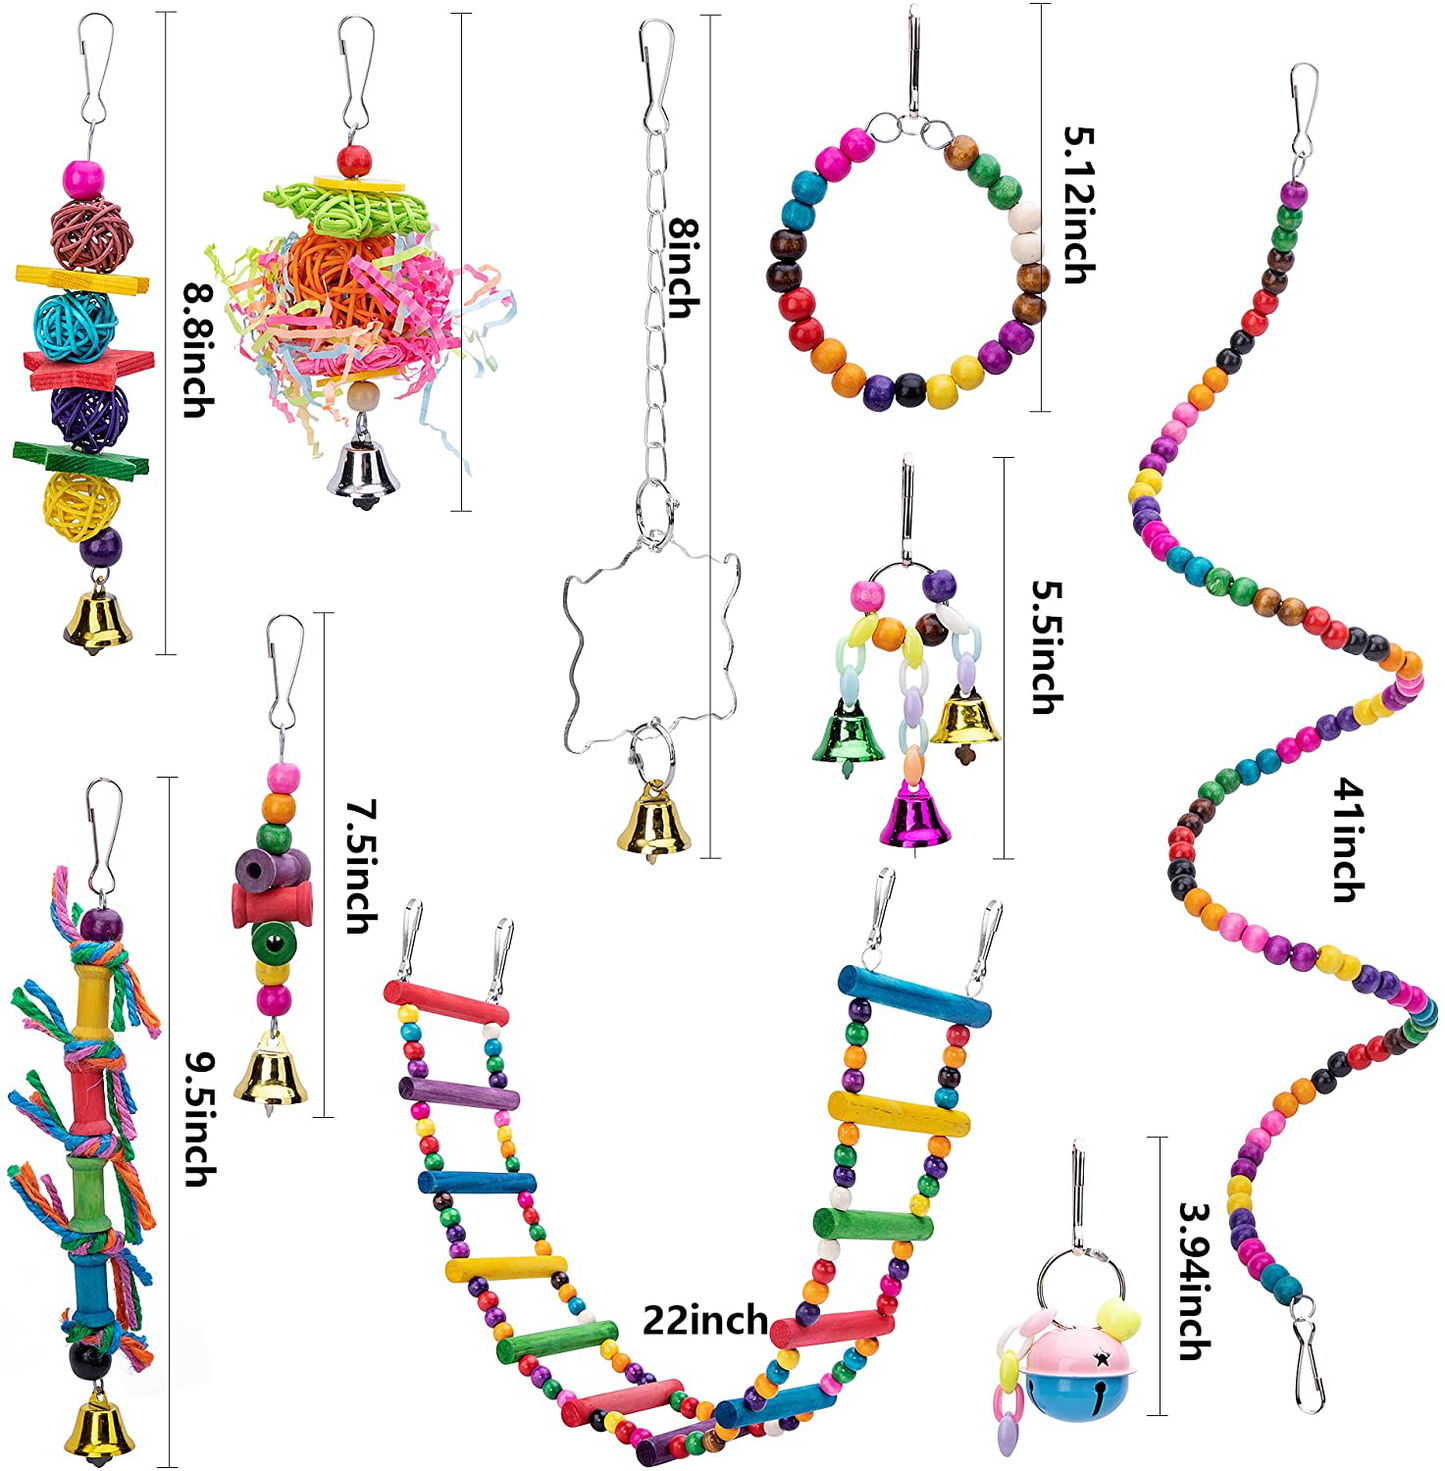 Ebaokuup 10 Packs Bird Swing Chewing Toys- Parrot Hammock Bell Toys Parrot Cage Toy Bird Perch with Wood Beads Hanging for Small Parakeets, Cockatiels, Conures, Finches,Budgie,Parrots, Love Birds